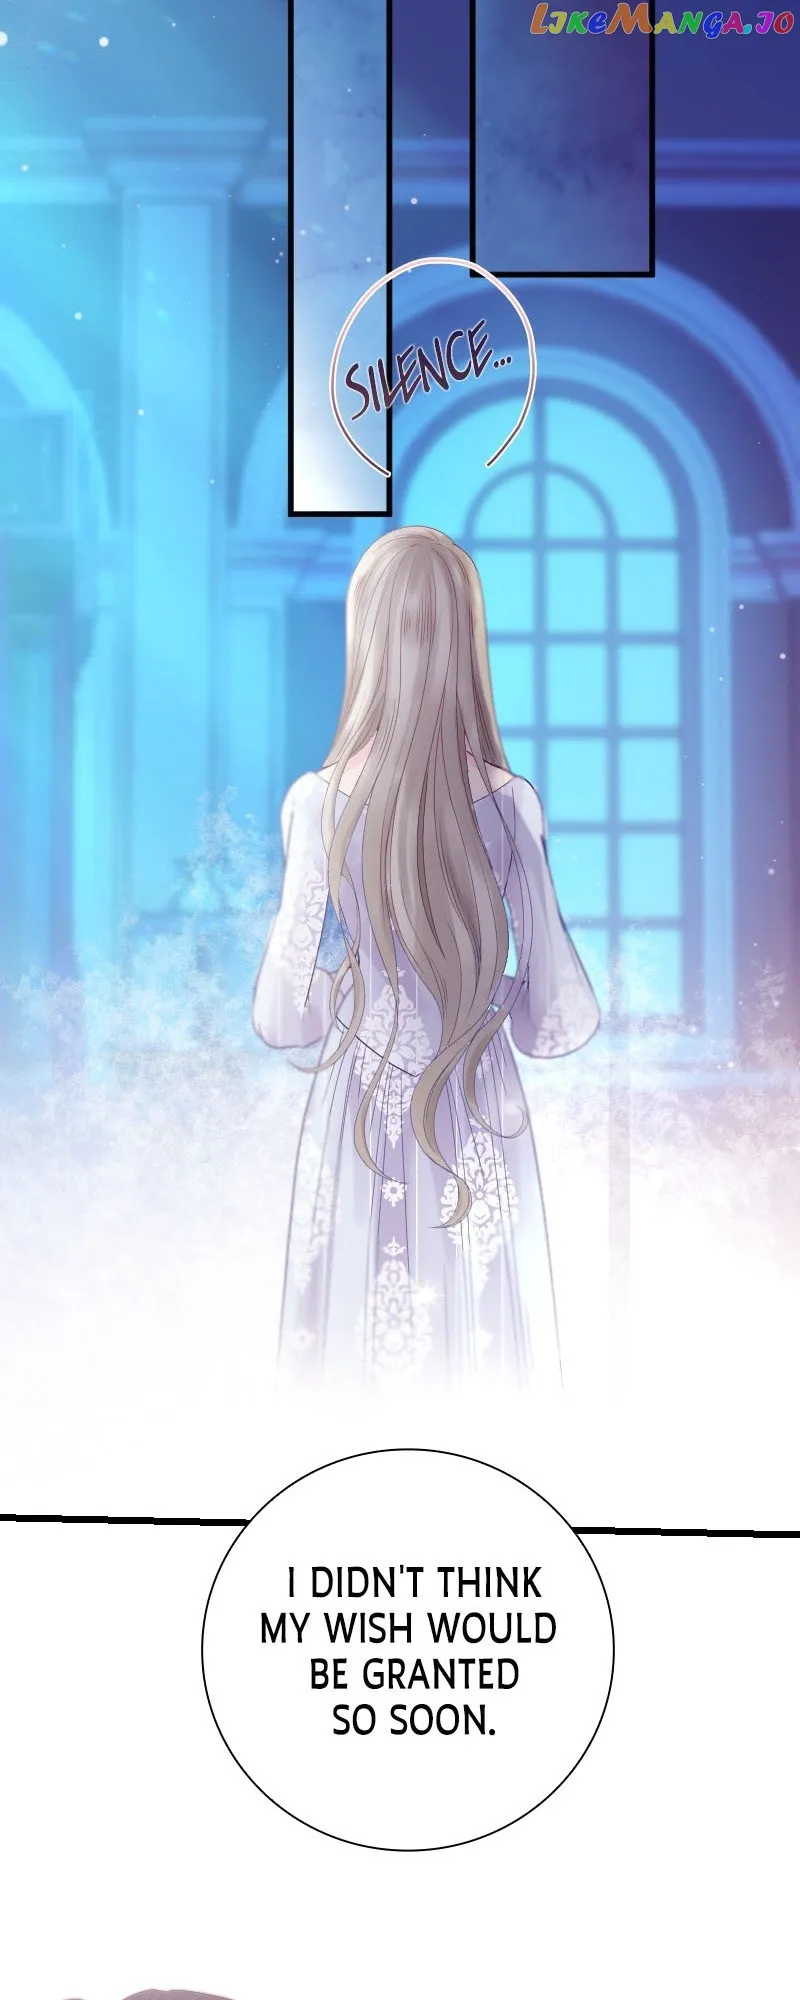 Chords of Affection: The Icy Monarch’s Love chapter 5